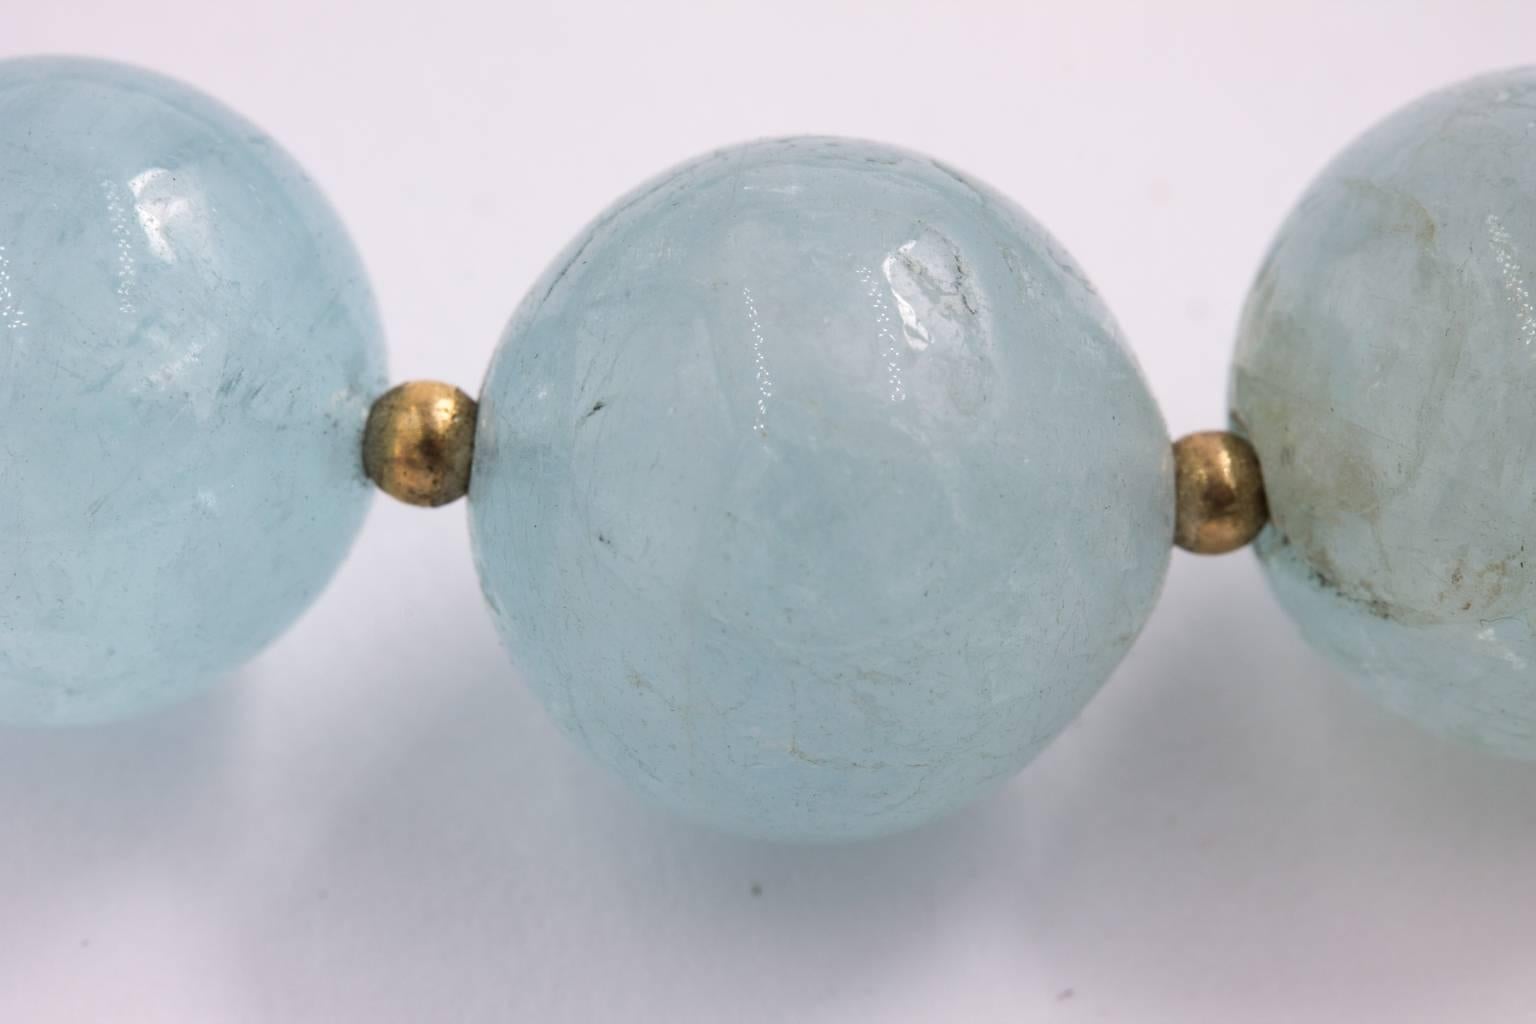 This is a beautiful necklace made from 14 mm natural aquamarine beads. 17 inches long closed with 14K yellow gold toggle clasp. There are 2 mm 14K gold beads in between the aquamarine beads.
PERIOD:1980s-Present
MATERIALS:Gold
